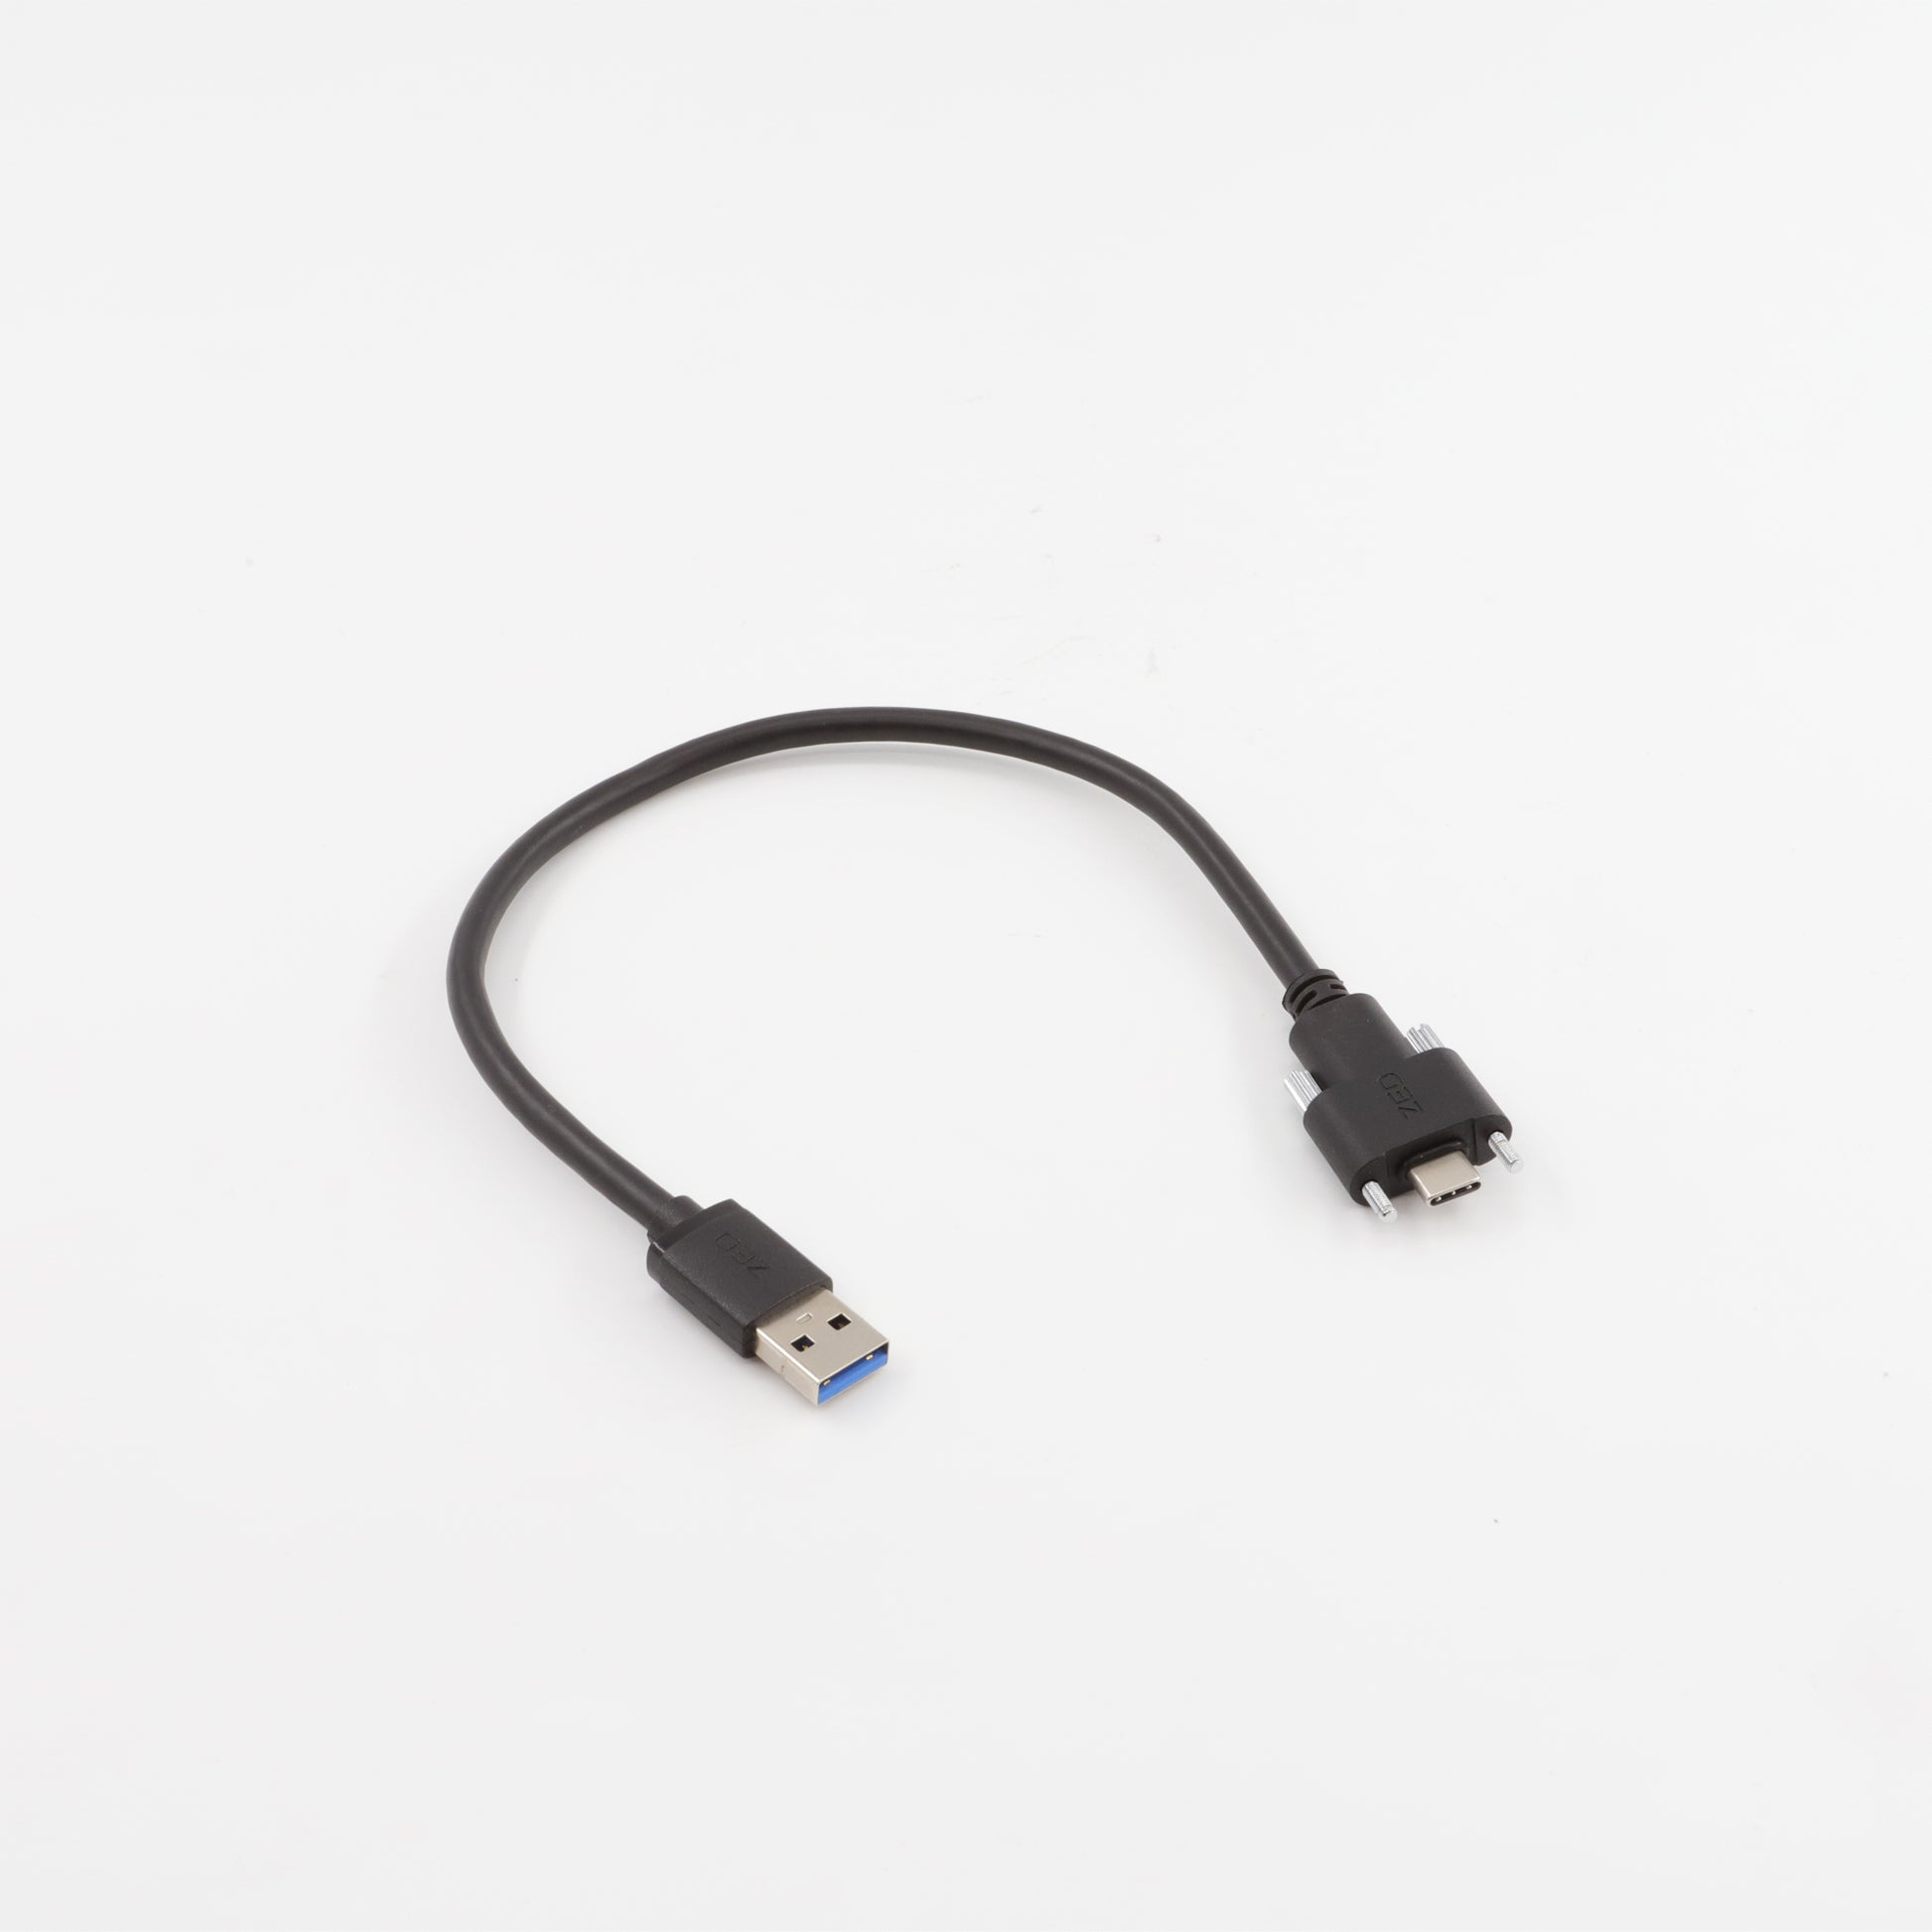 USB 3.0 Type-C Cable